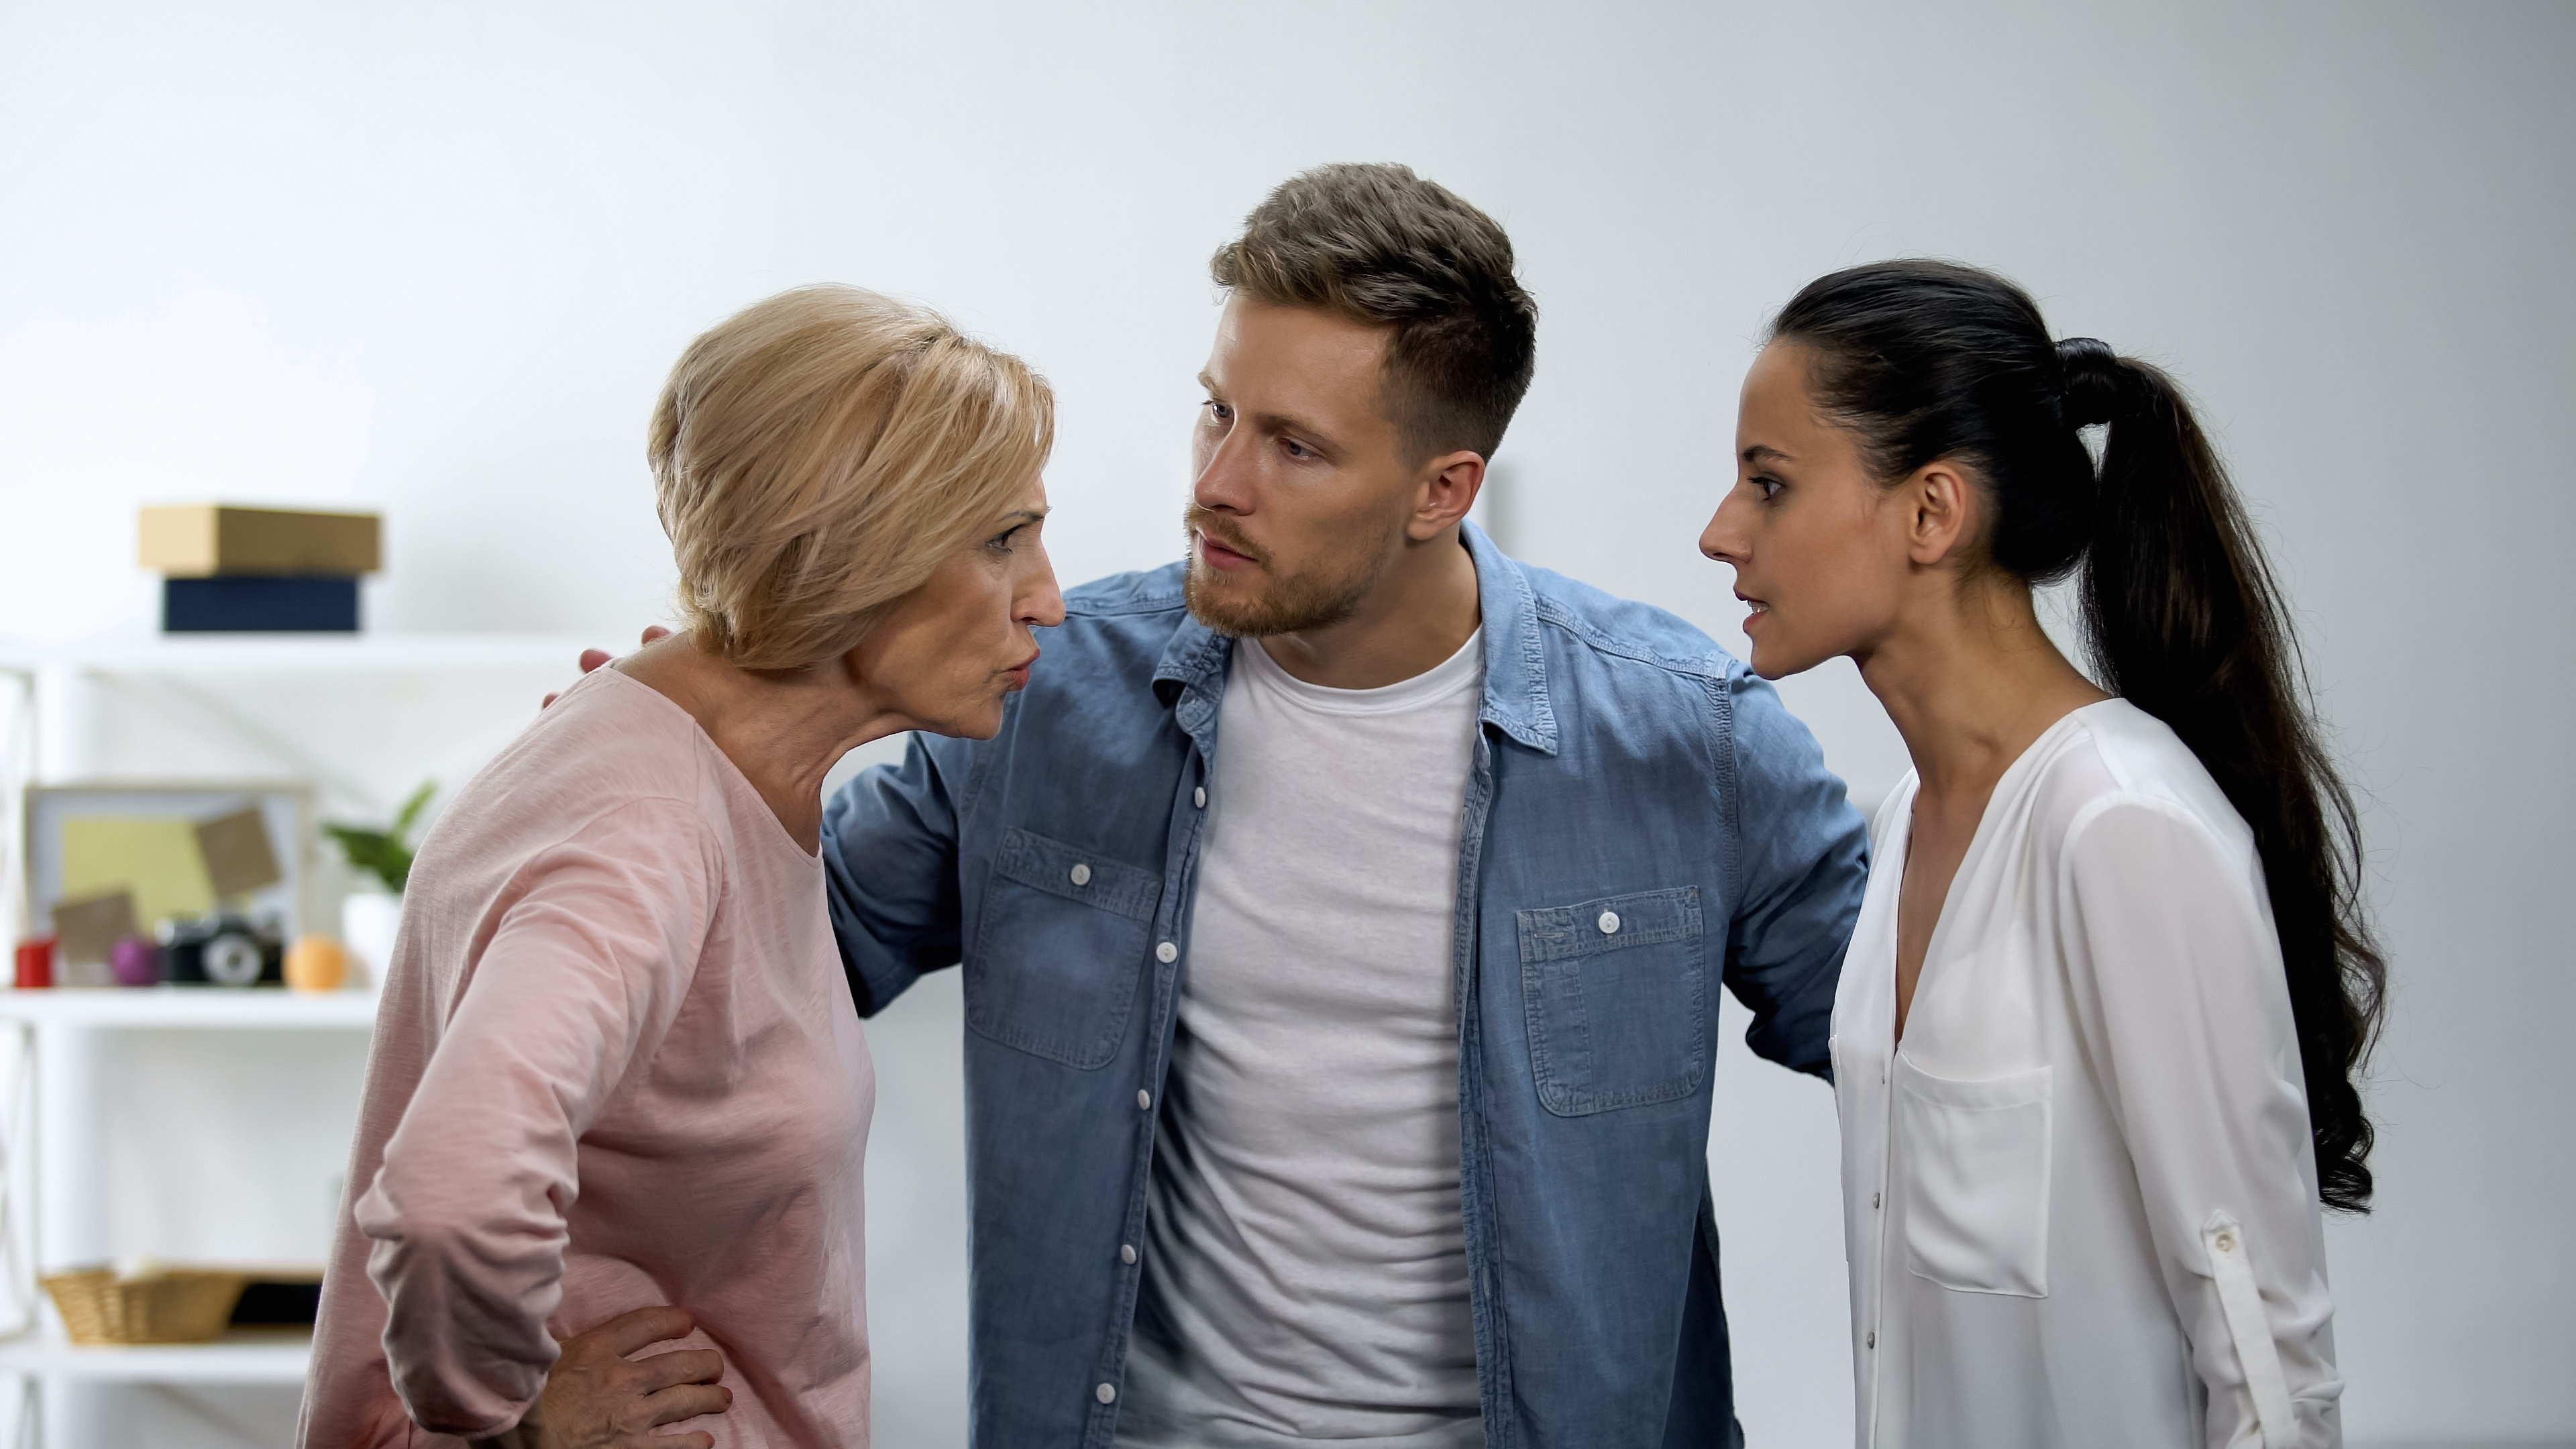 A husband trying to settle a rift between his wife and mother | Source: Shutterstock